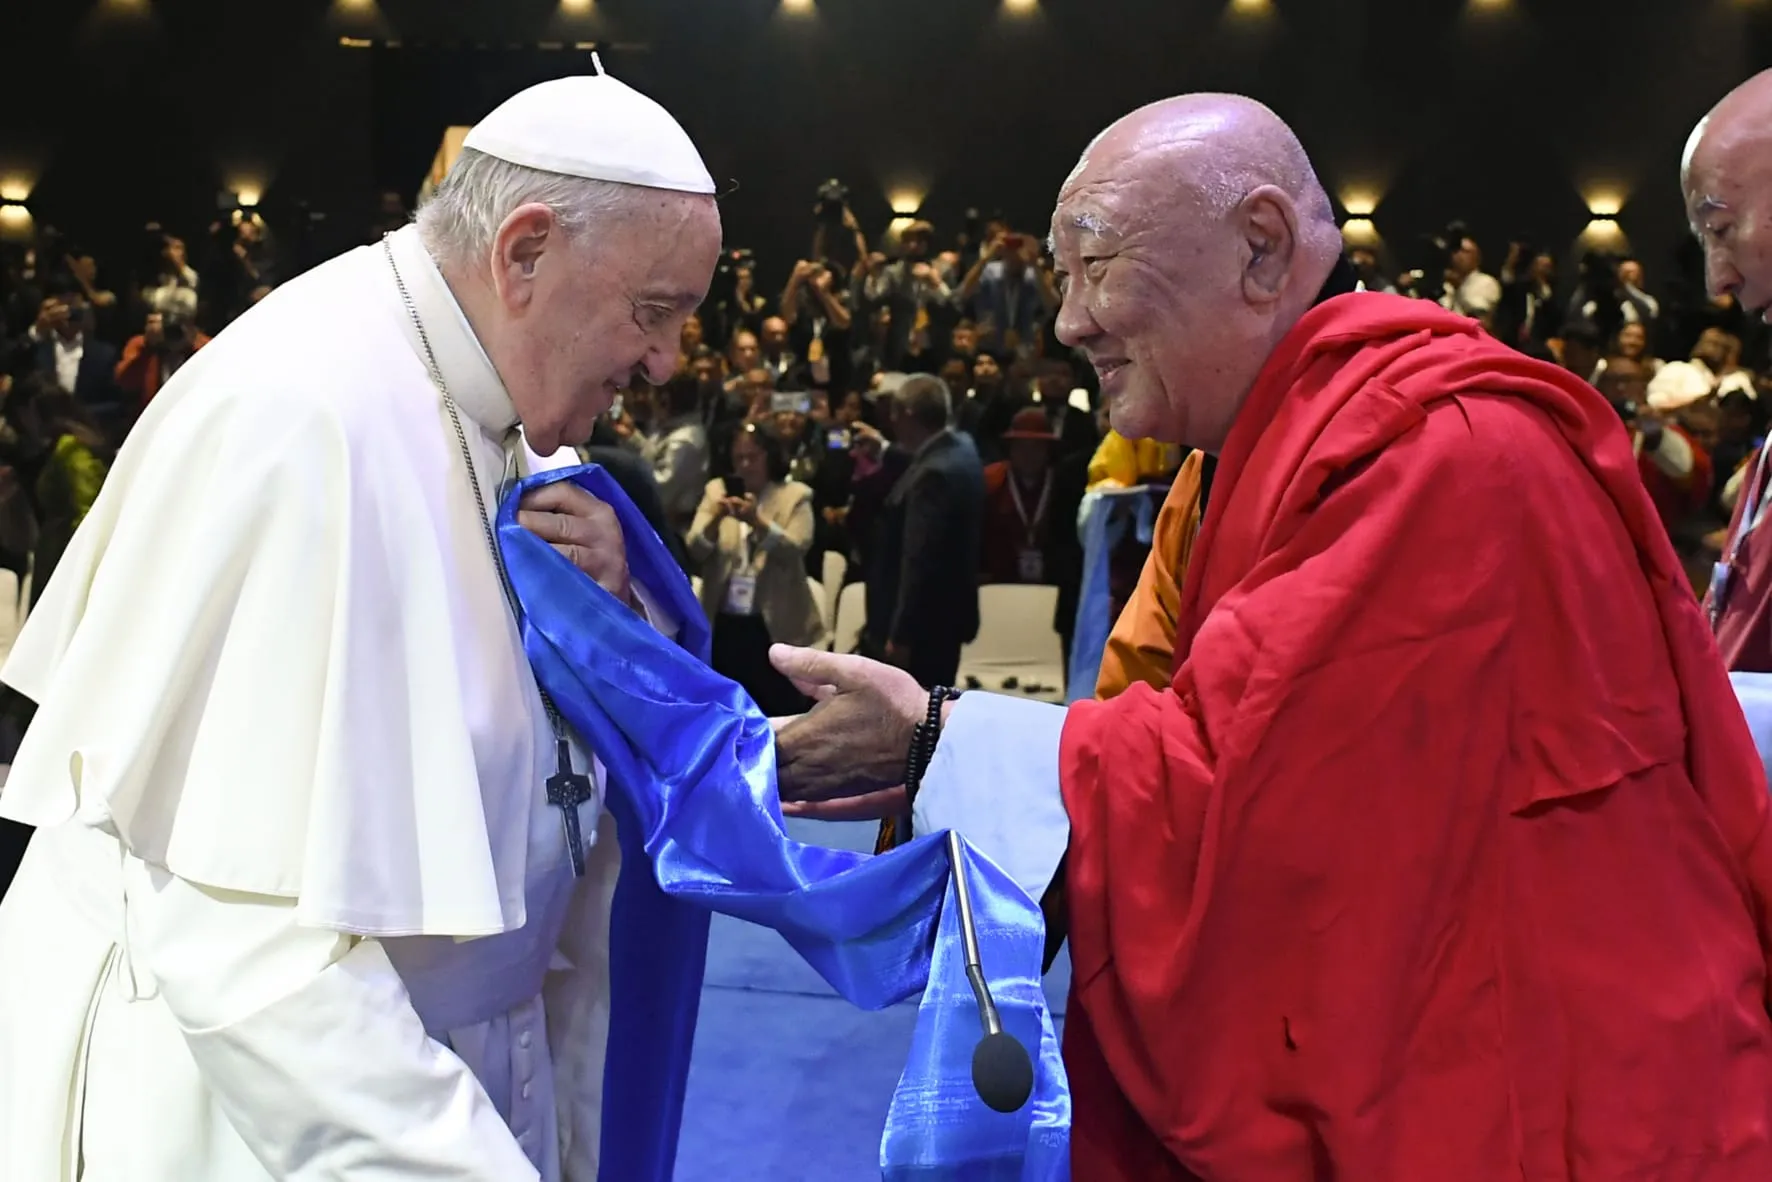 Khamba Nomun Khan, the head of the Gandan Monastery in Ulaanbaatar, accompanied Pope Francis as he made his entrance at the interreligious dialogue event at the Hun Theater in Mongolia on Sept. 3, 2023.?w=200&h=150